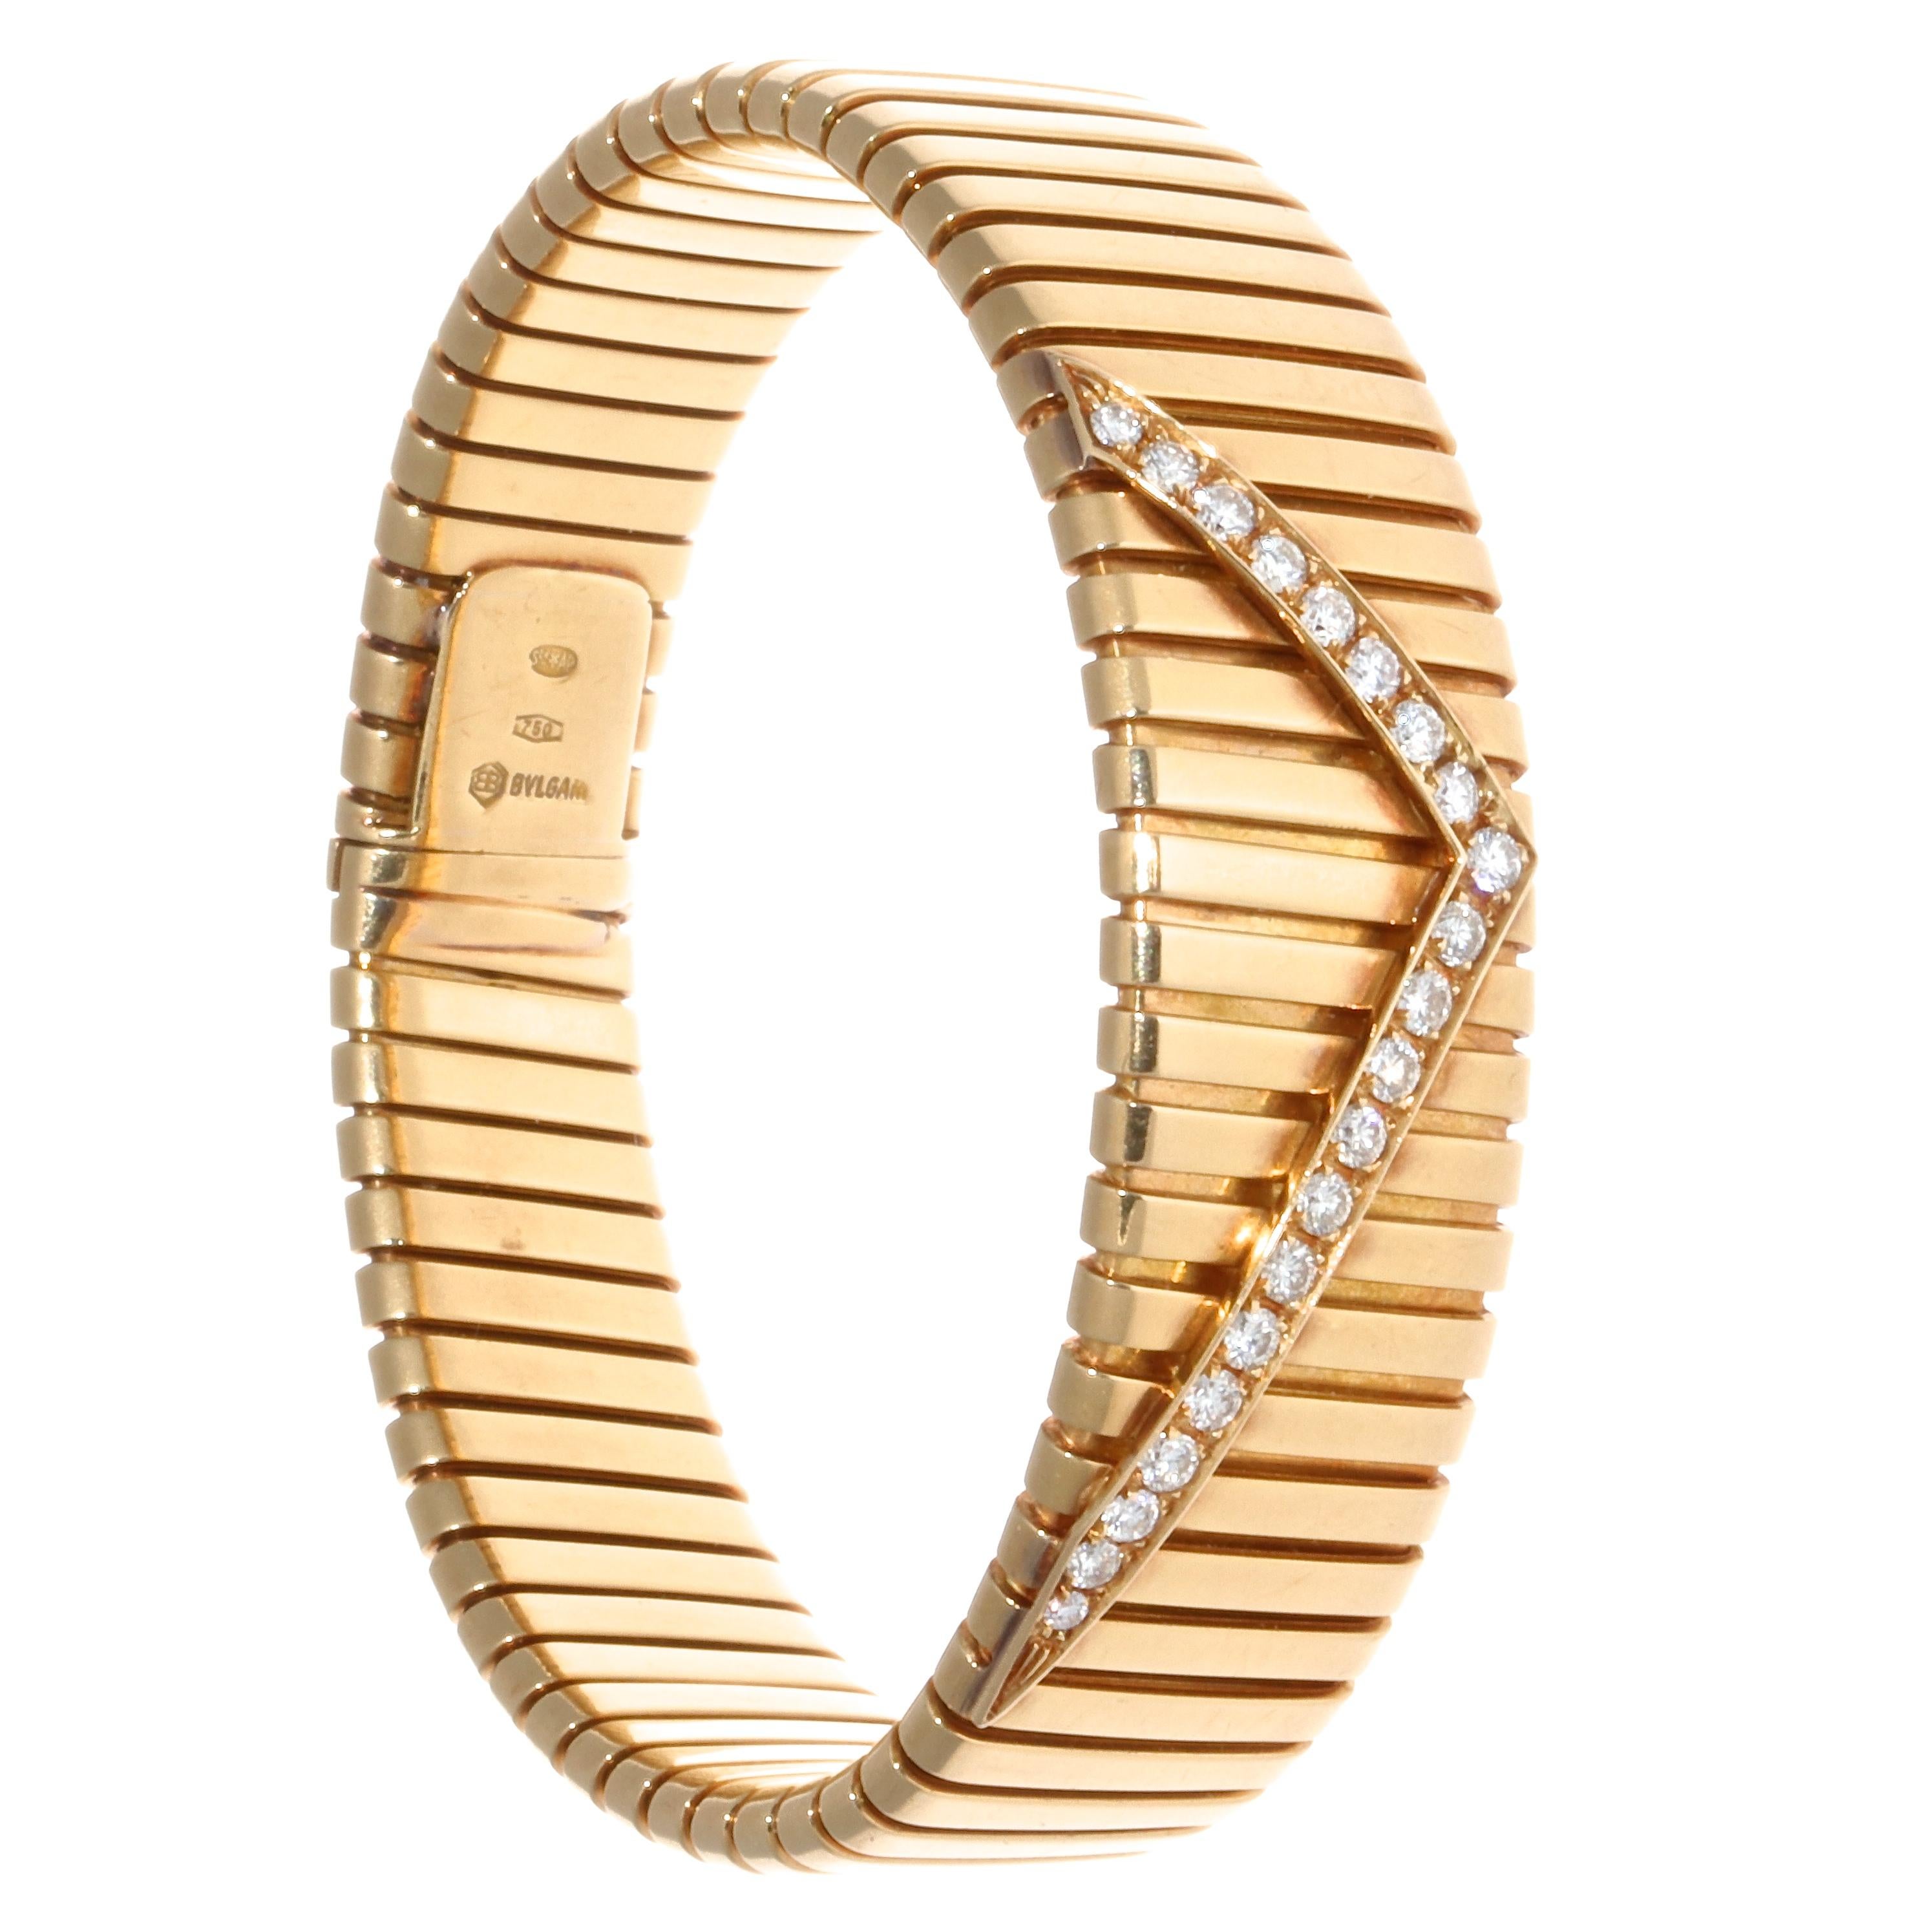 The iconic Bulgari  Tubogas bracelet is the perfect addition to your signed jewelry collection. You can't go wrong with classic yellow gold and diamonds especially since solid gold pieces have been a hot trend lately.  This iconic Tubogas bracelet